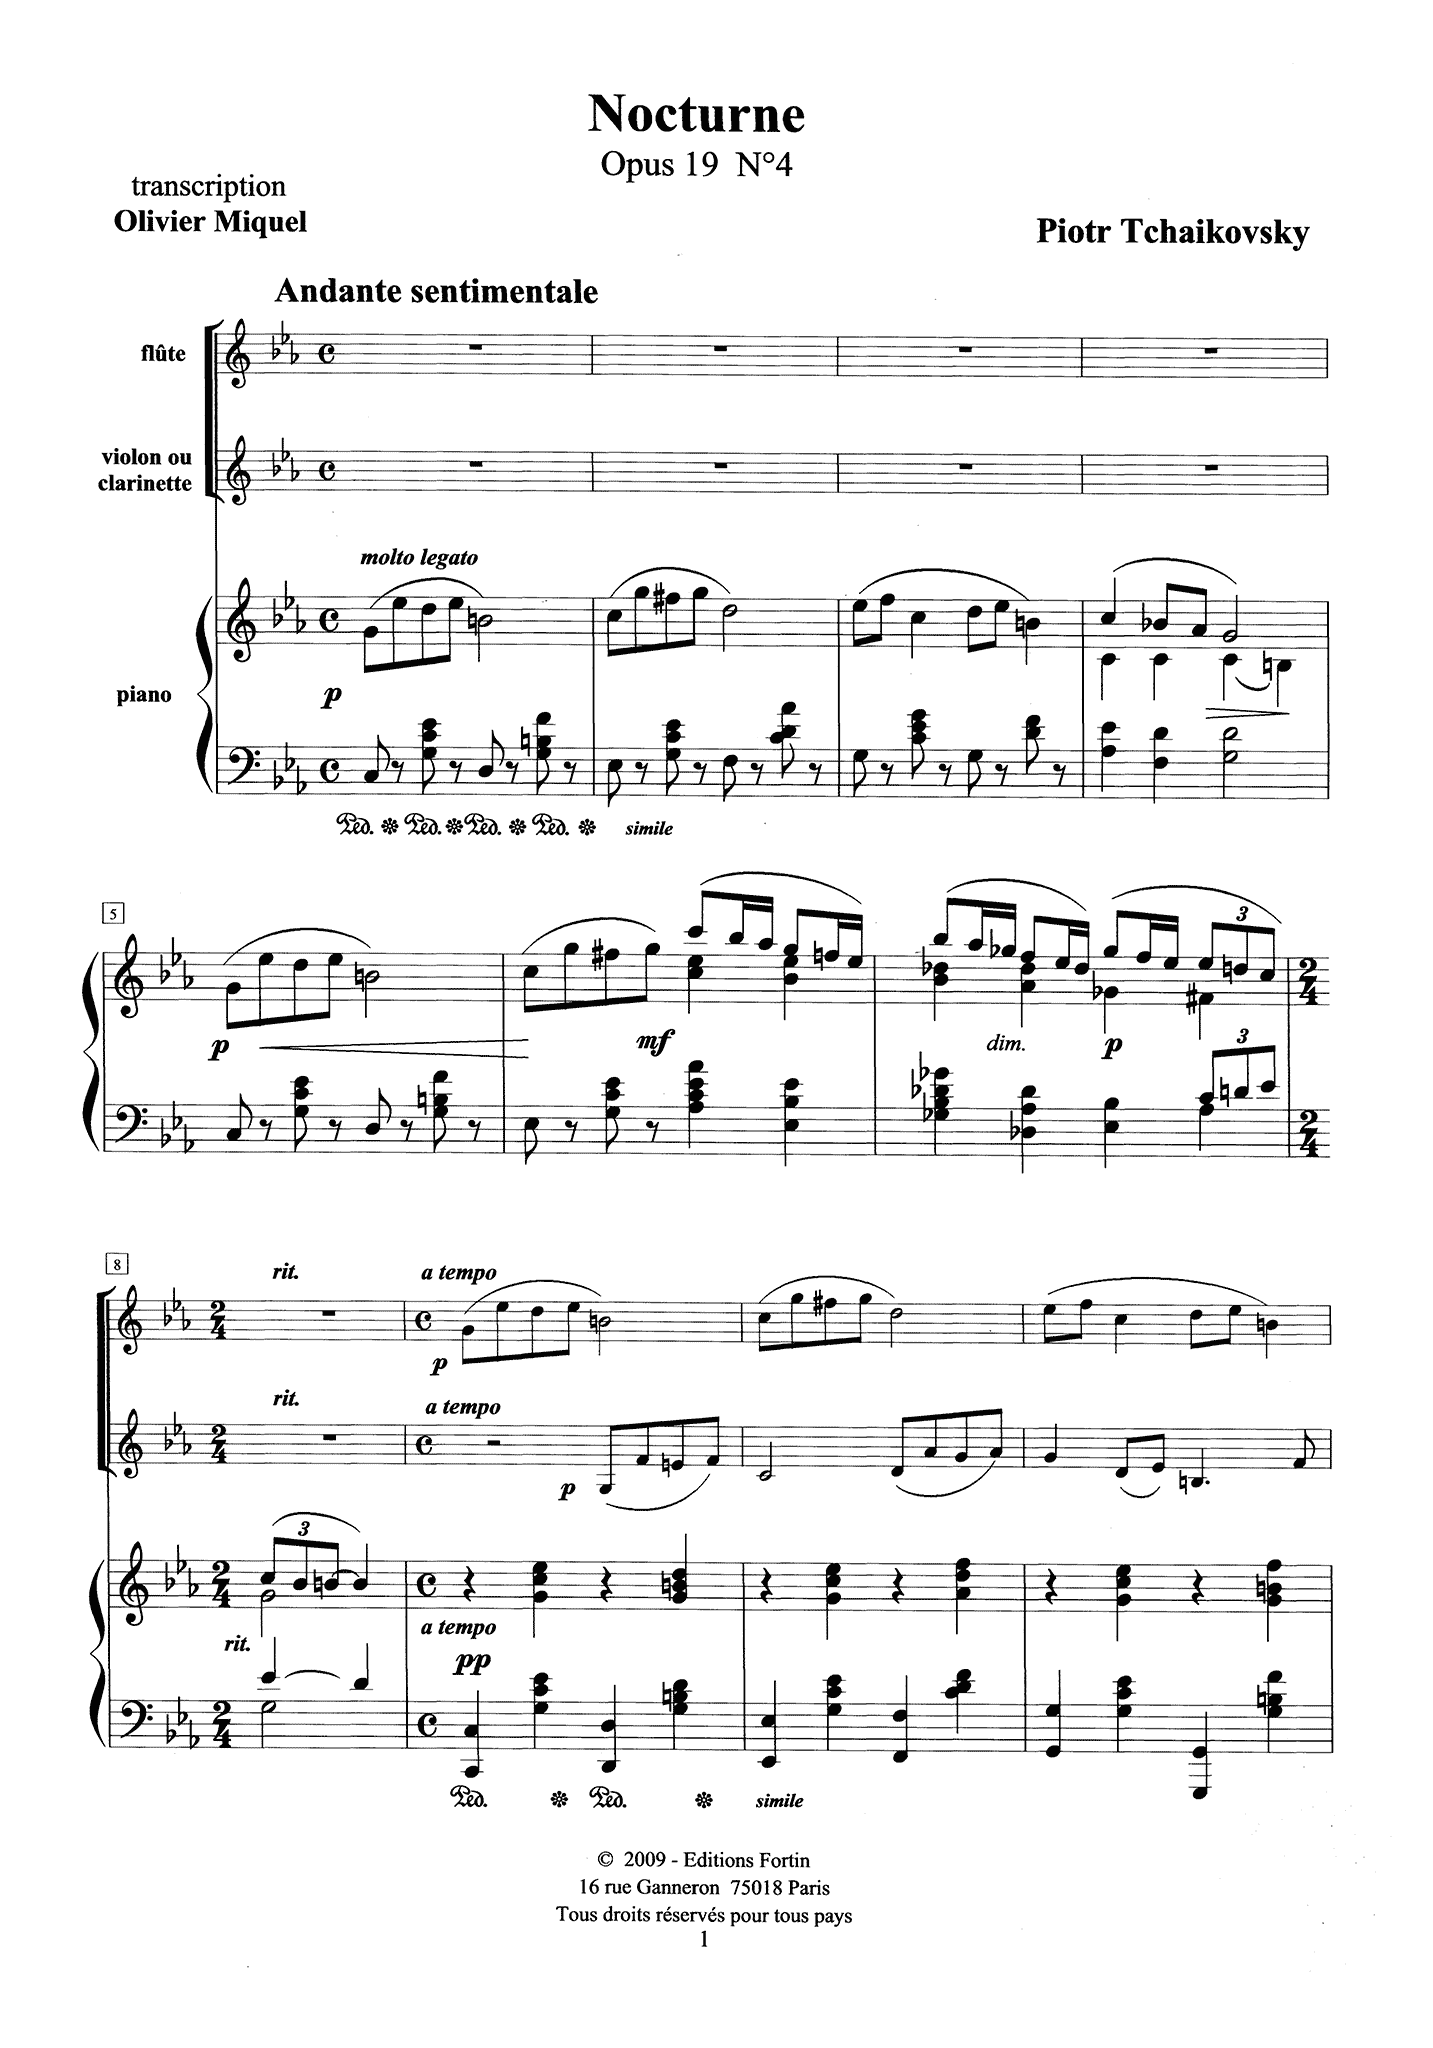 Nocturne, from 6 Pieces, Op. 19 No. 4 flute clarinet and piano arrangement 